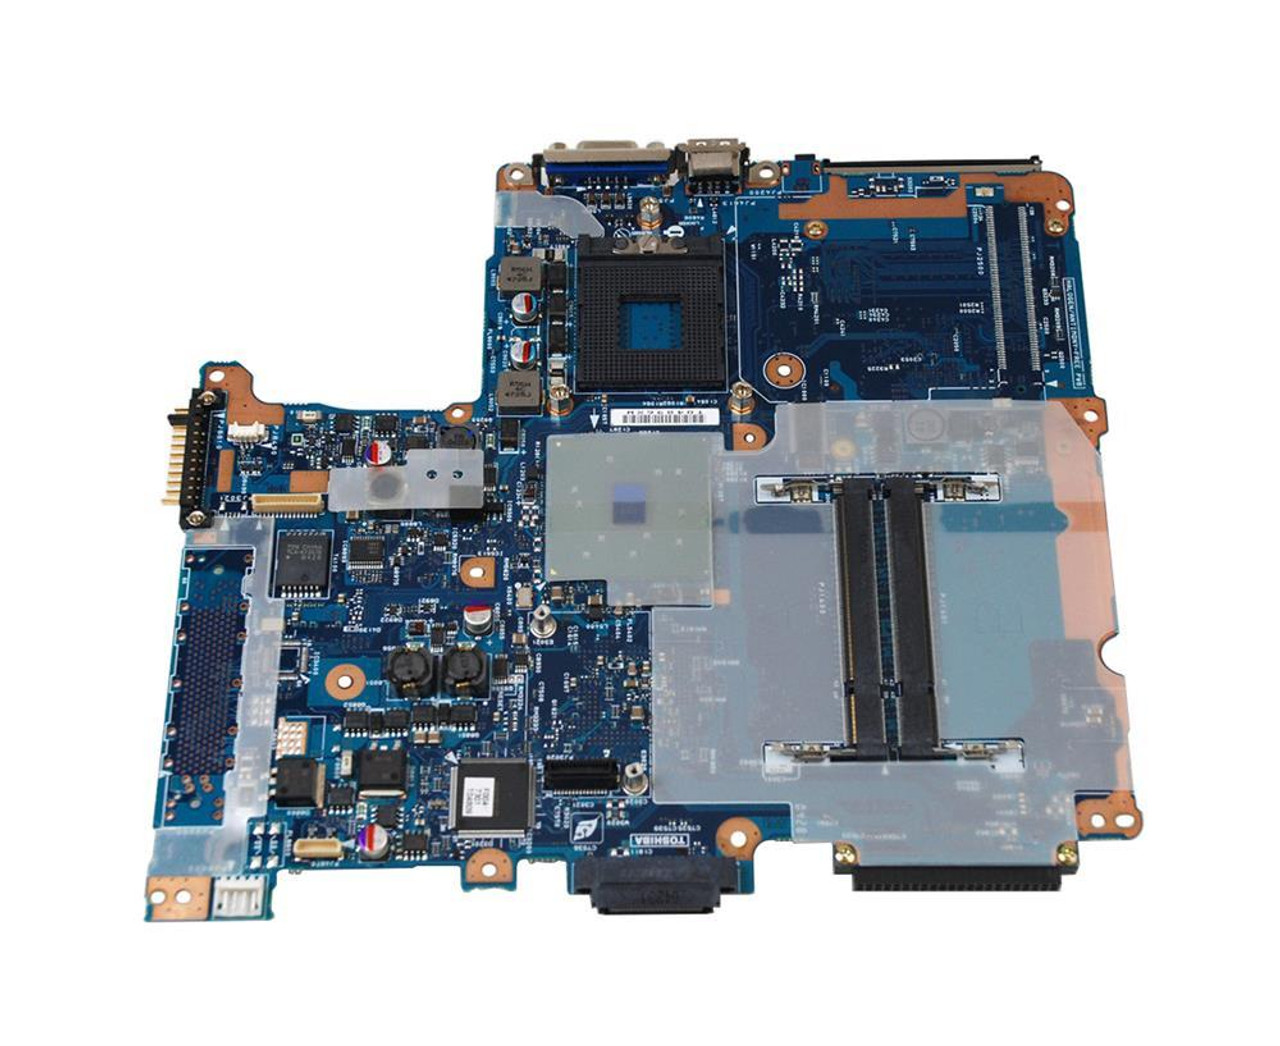 P000599810 Toshiba System Board (Motherboard) for Tecra A50-a1550 Laptop (Refurbished)